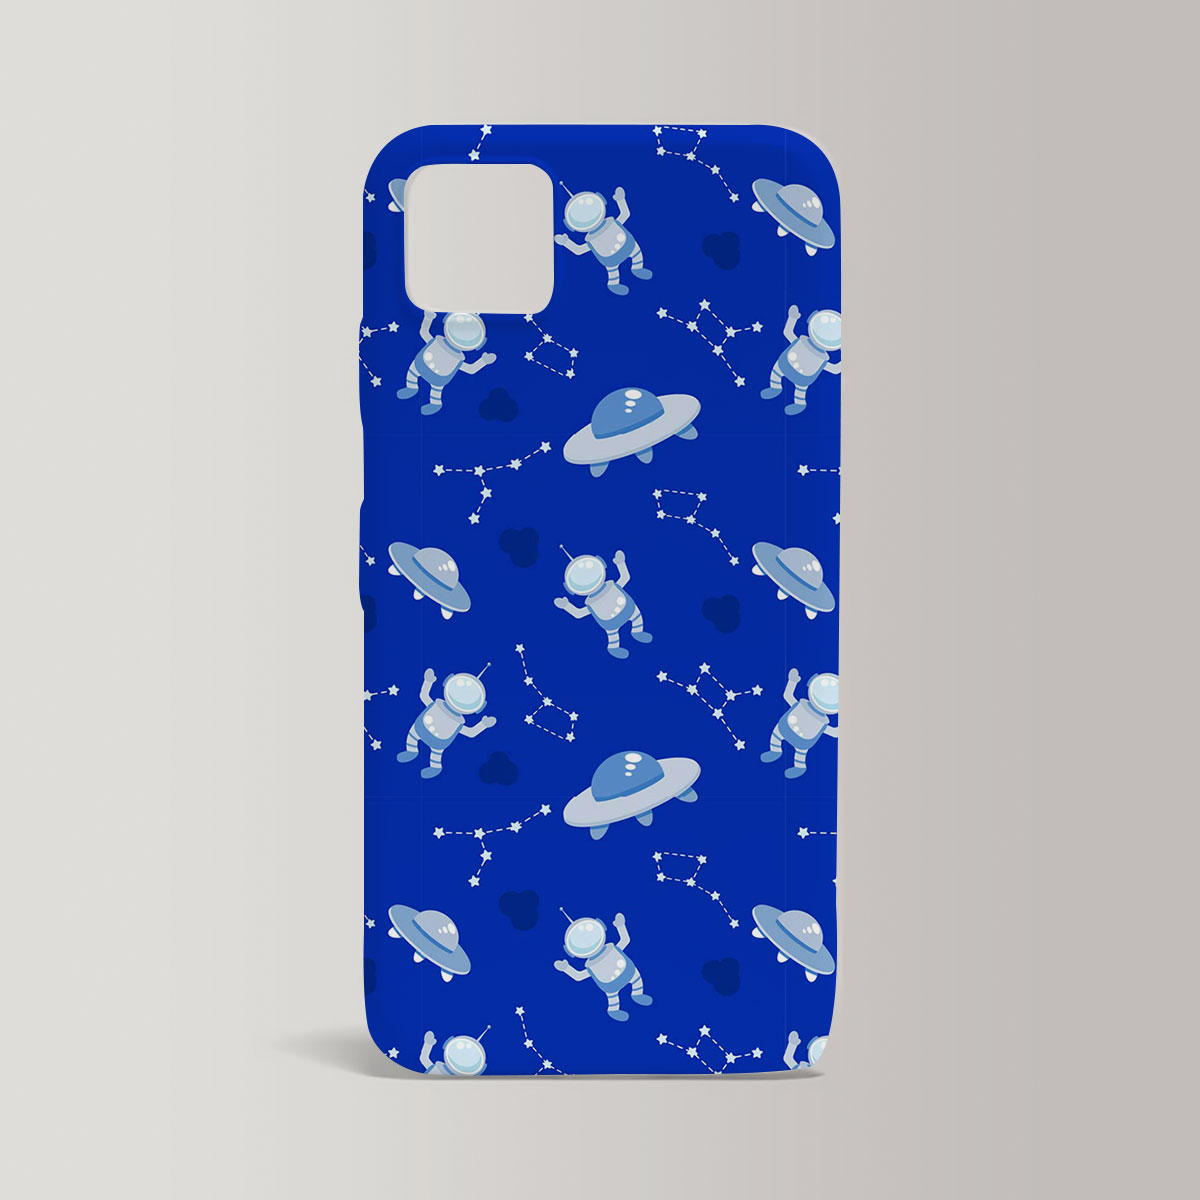 Astronauts Spaceships And Constellation Iphone Case